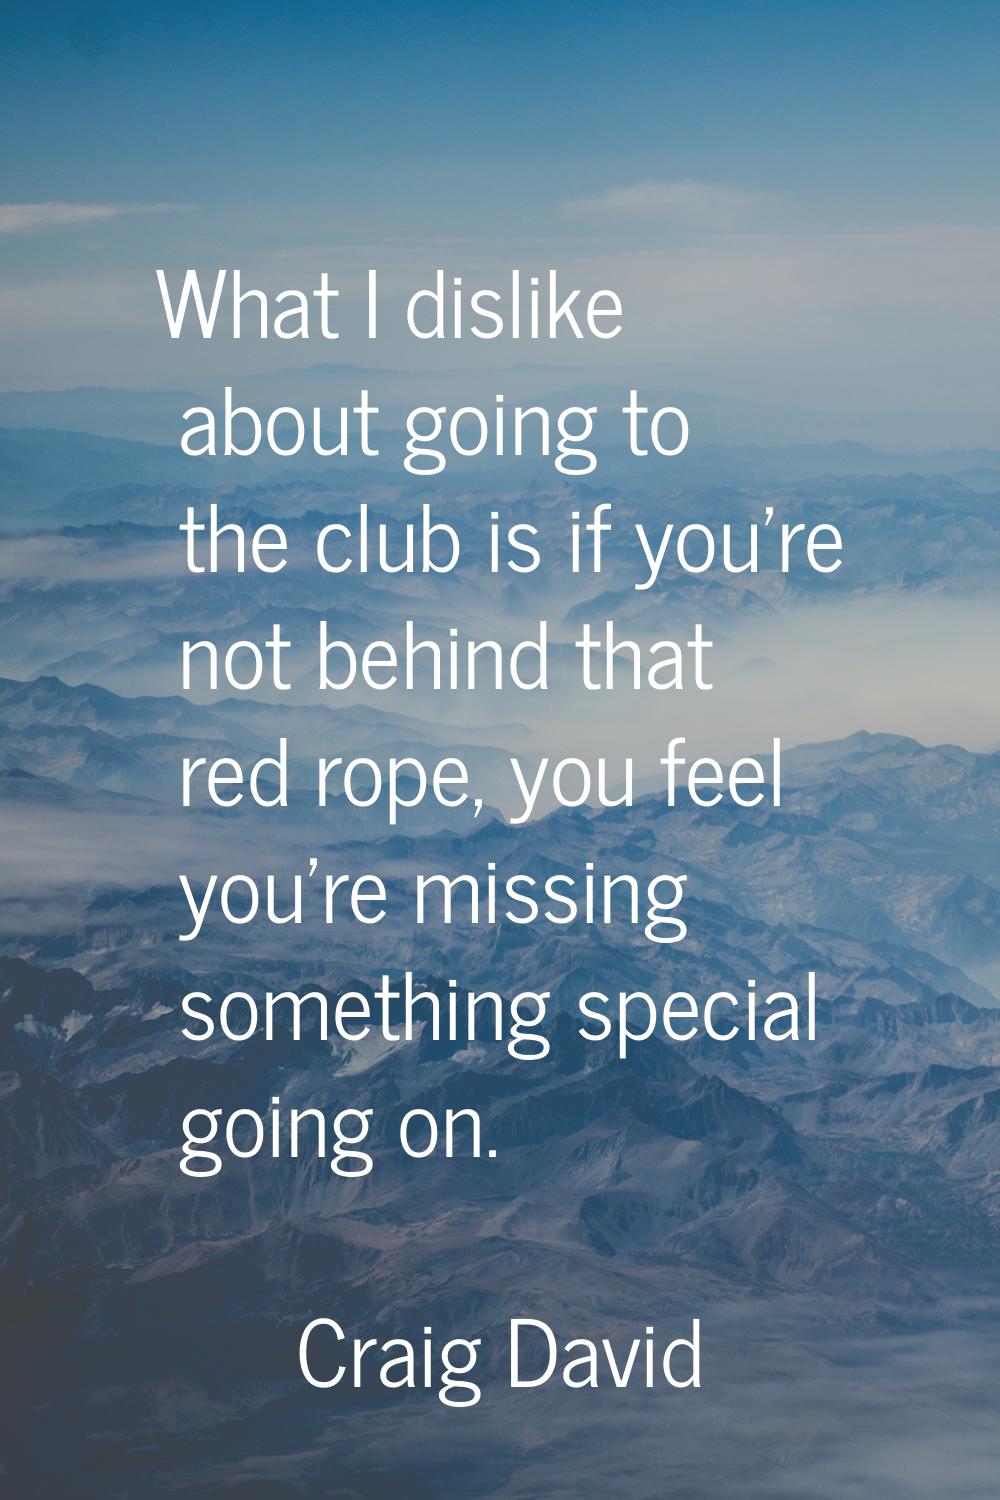 What I dislike about going to the club is if you're not behind that red rope, you feel you're missi